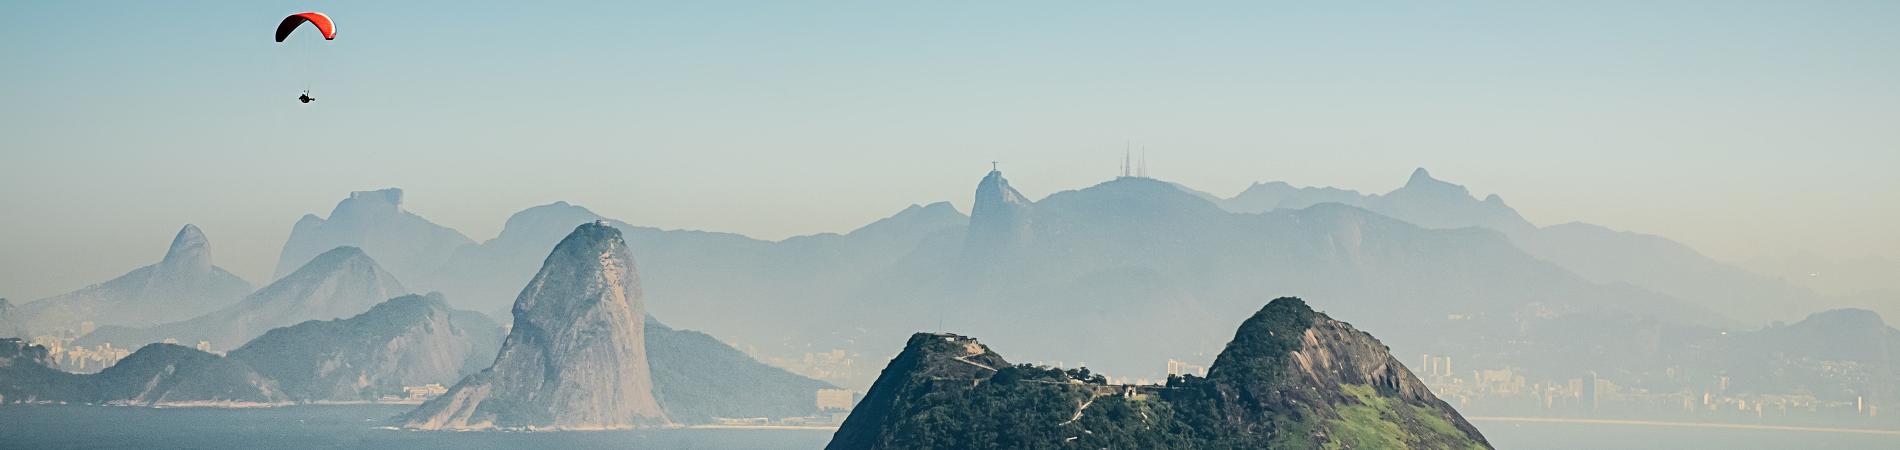 Image for Three things to do in Rio de Janeiro